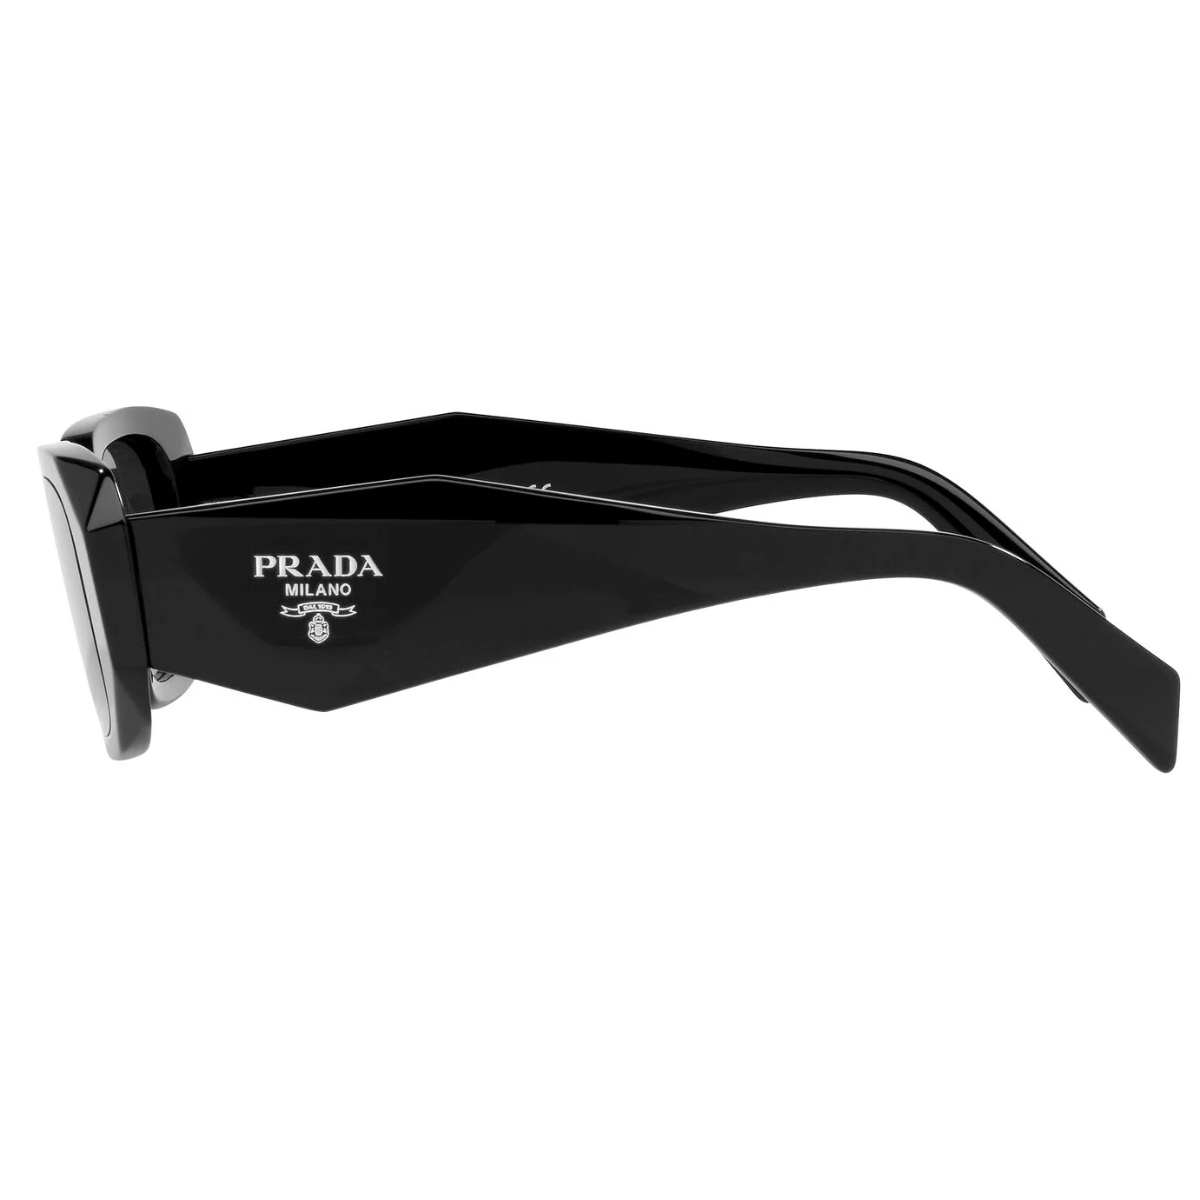  "Unisex Prada SPR 17WS 1AB5S0 sunglasses available at Optorium, boasting a sleek rectangular silhouette and chic shiny black frame, the perfect accessory for a stylish summer look."